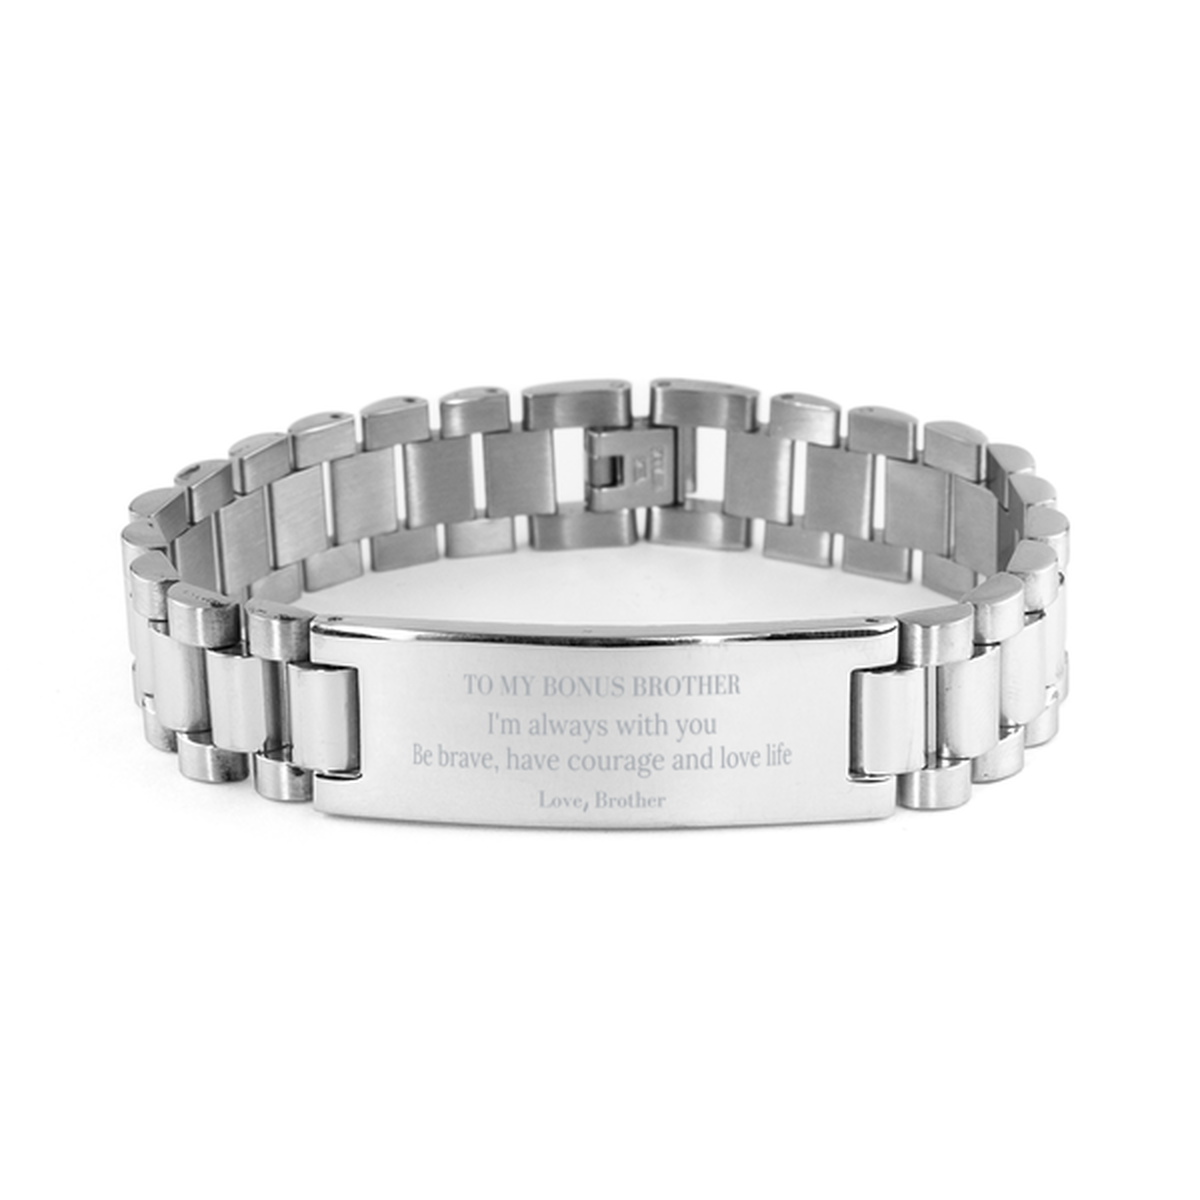 To My Bonus Brother Gifts from Brother, Unique Ladder Stainless Steel Bracelet Inspirational Christmas Birthday Graduation Gifts for Bonus Brother I'm always with you. Be brave, have courage and love life. Love, Brother